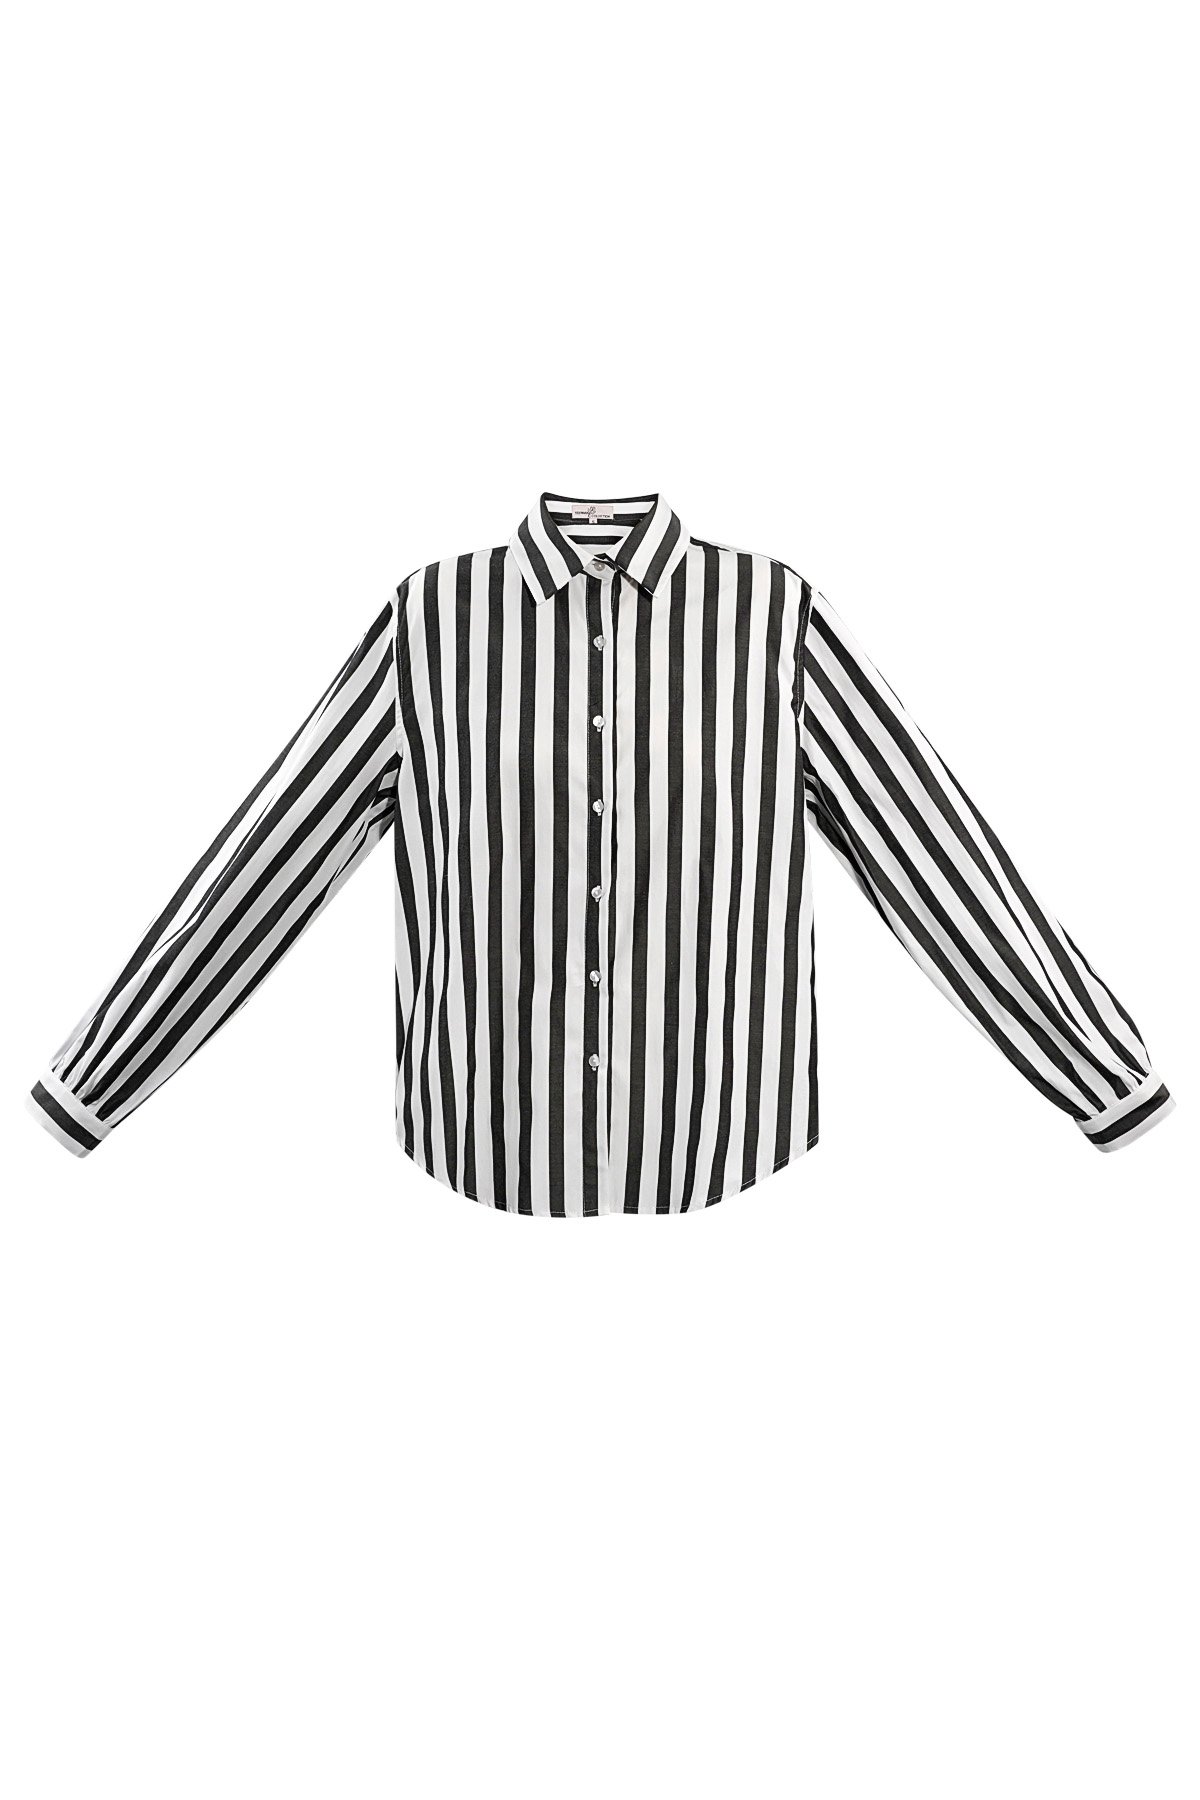 Striped casual blouse - black and white